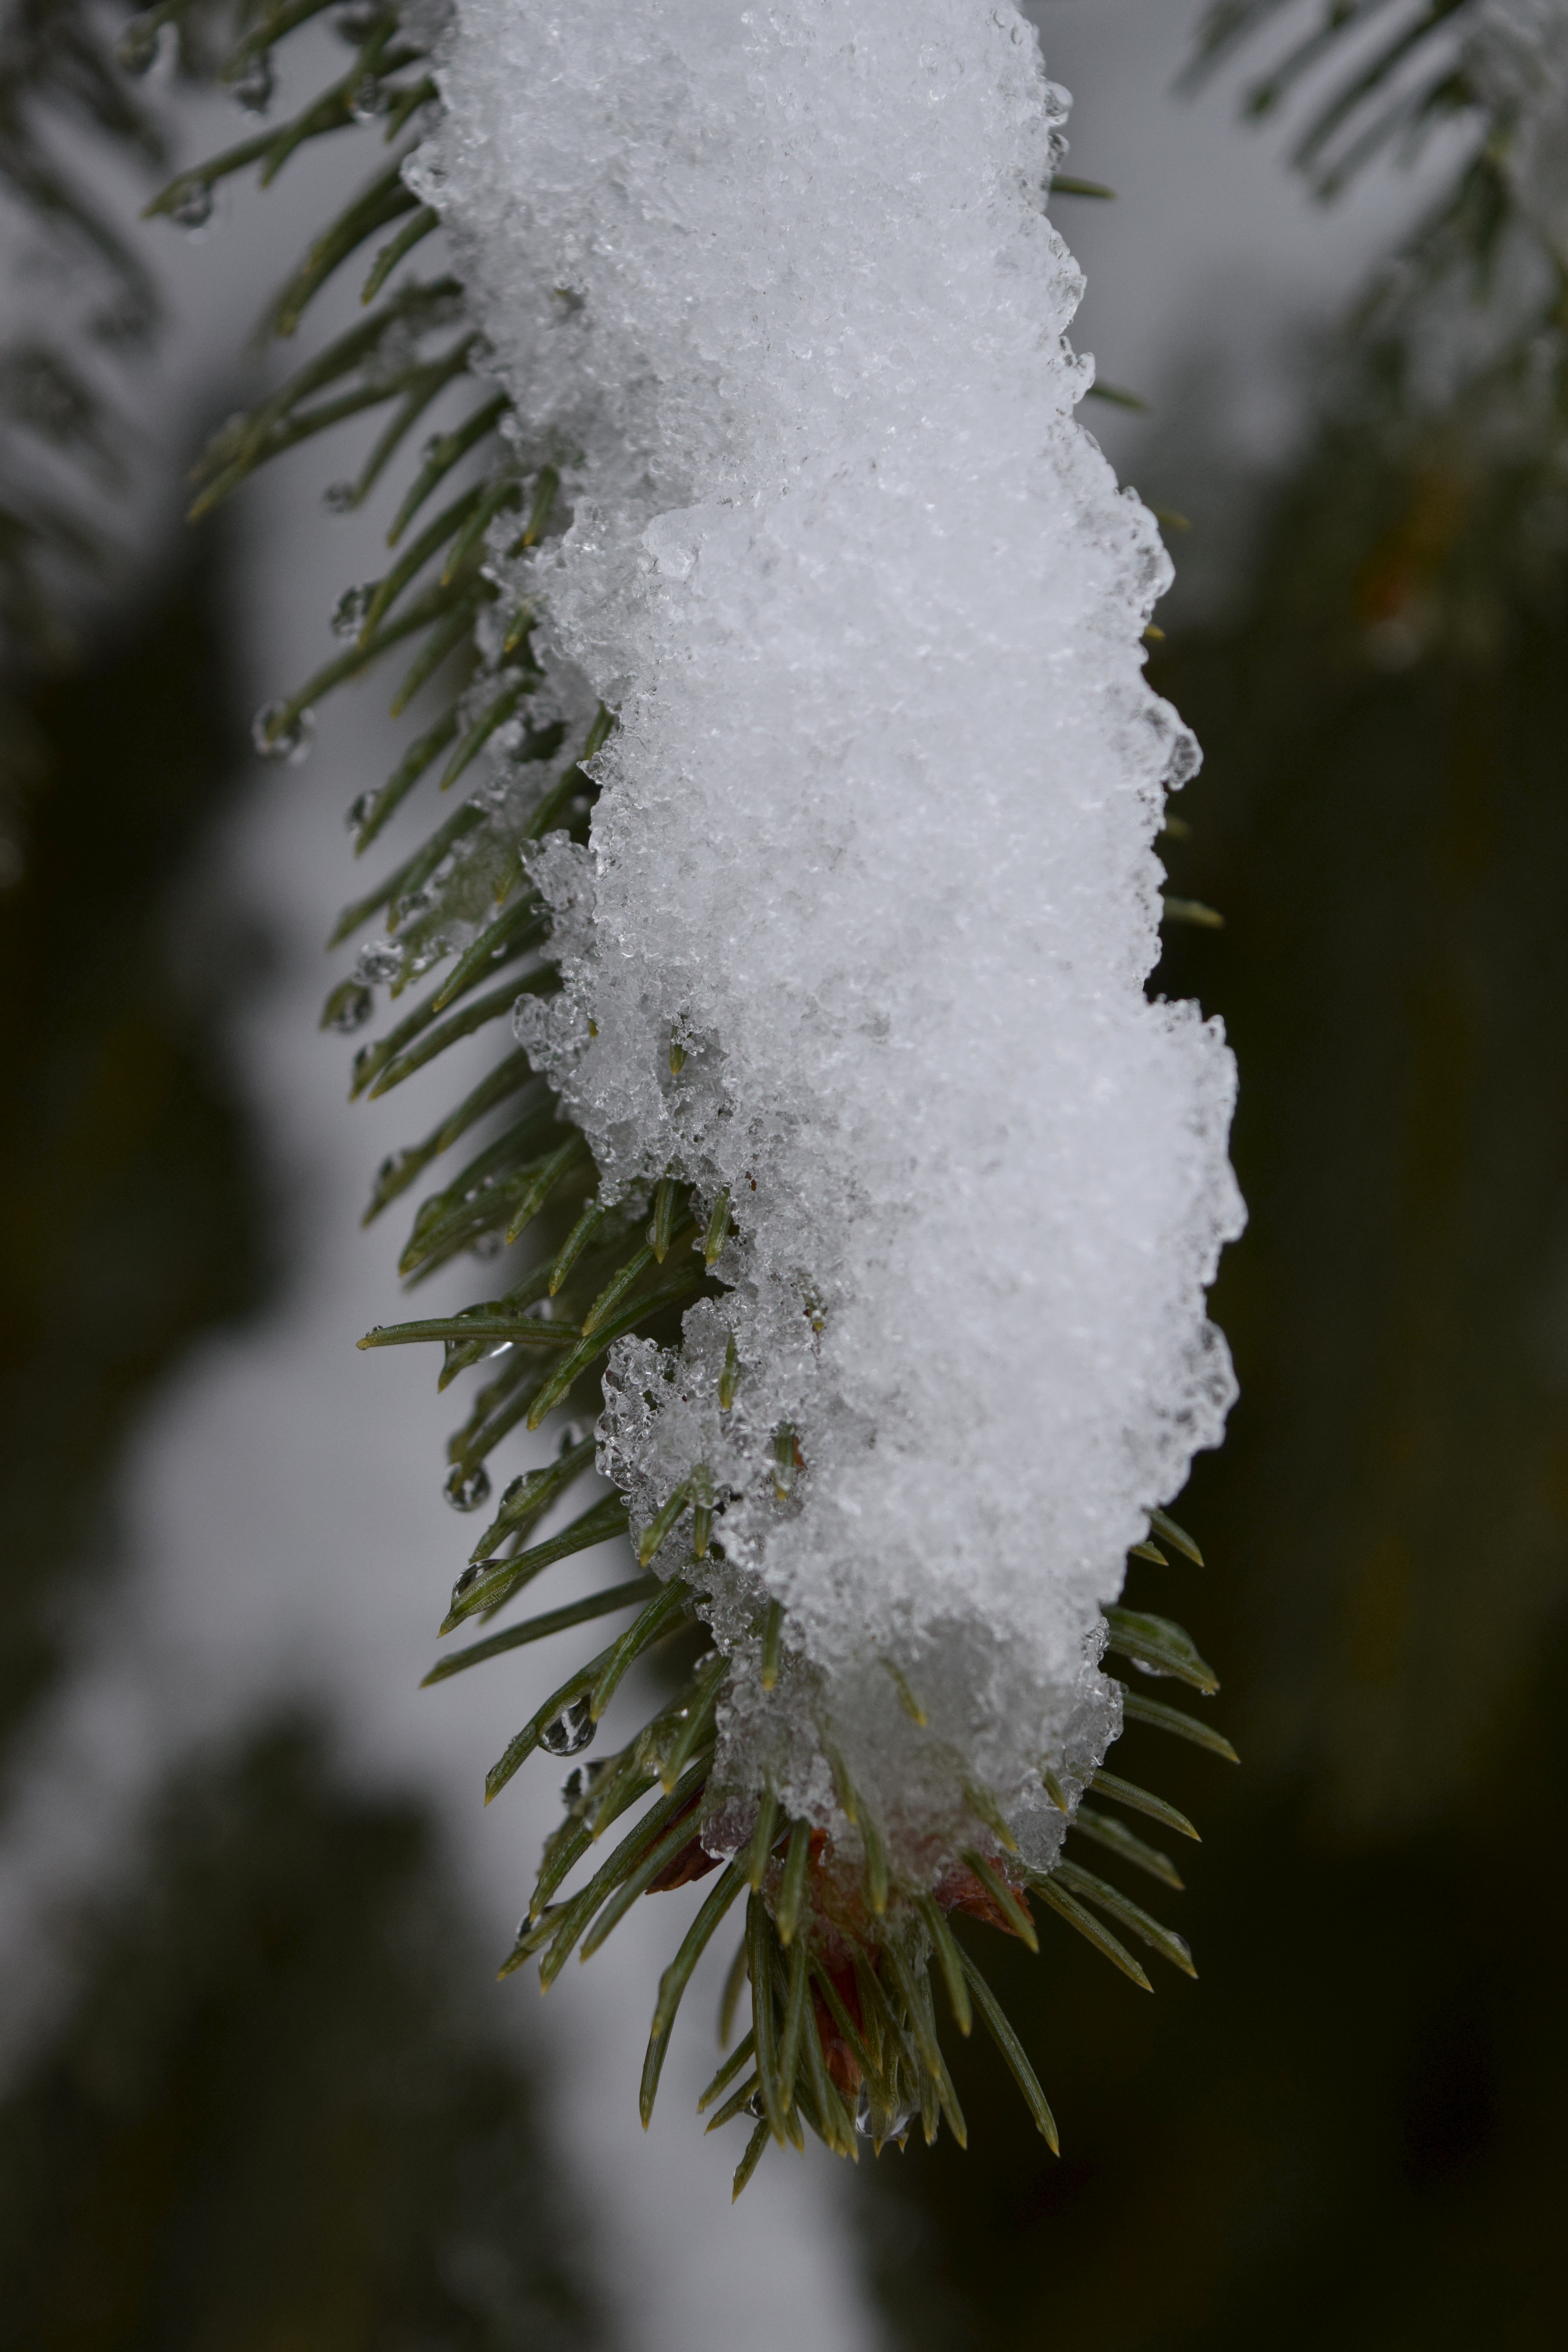 Evergreen needles are designed to shed loads of snow but this wet snow clings on top of the branches